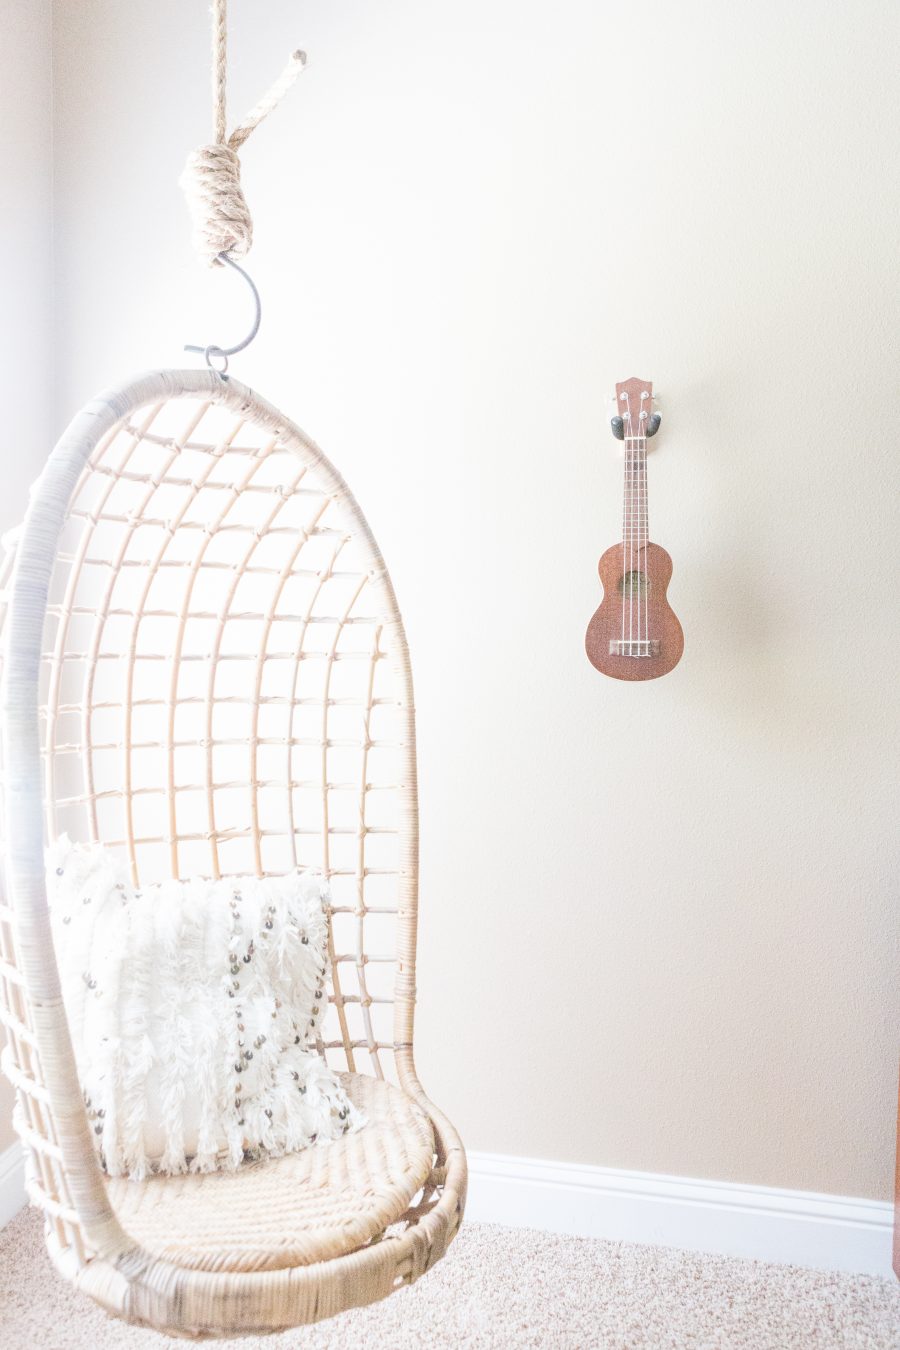 TEEN HANGOUT ROOM DESIGN PLAN AND HANGING CHAIRS with hanging chair and a fluffy white sequined pillow and a guitar hanging on the wall 